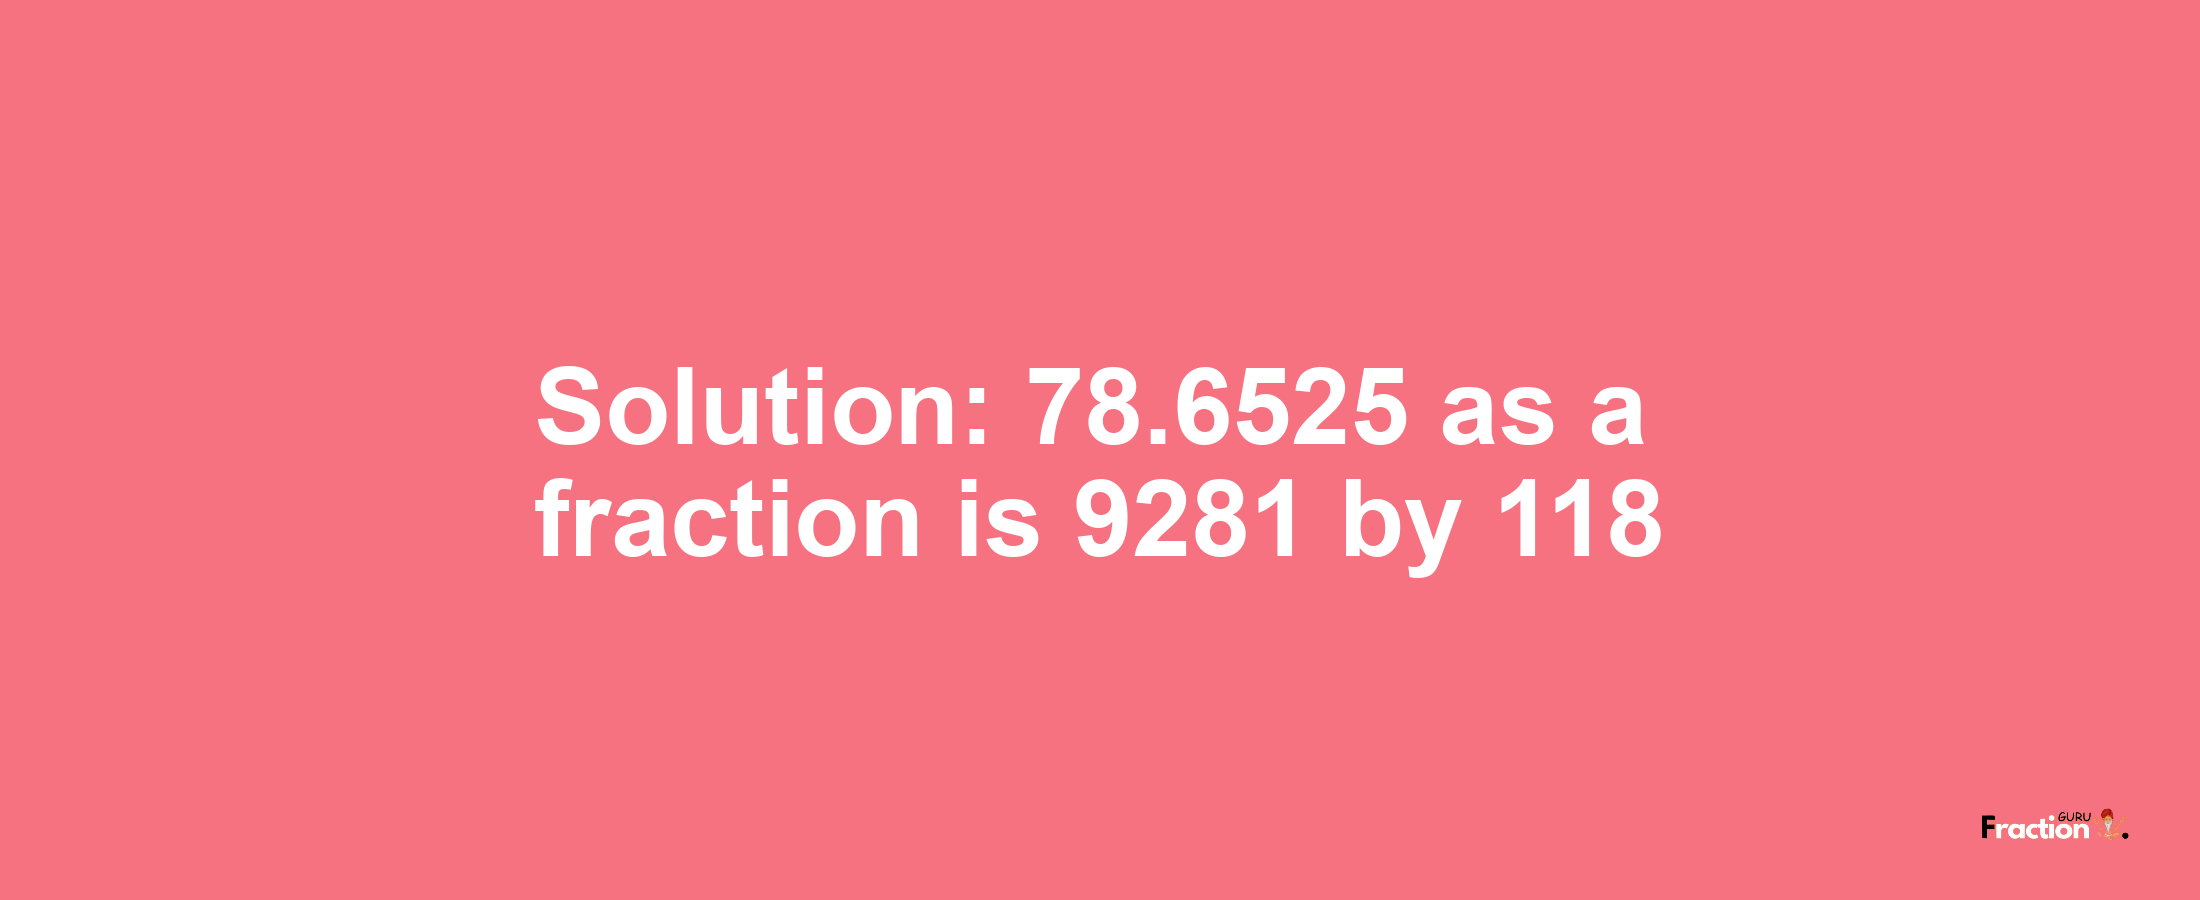 Solution:78.6525 as a fraction is 9281/118